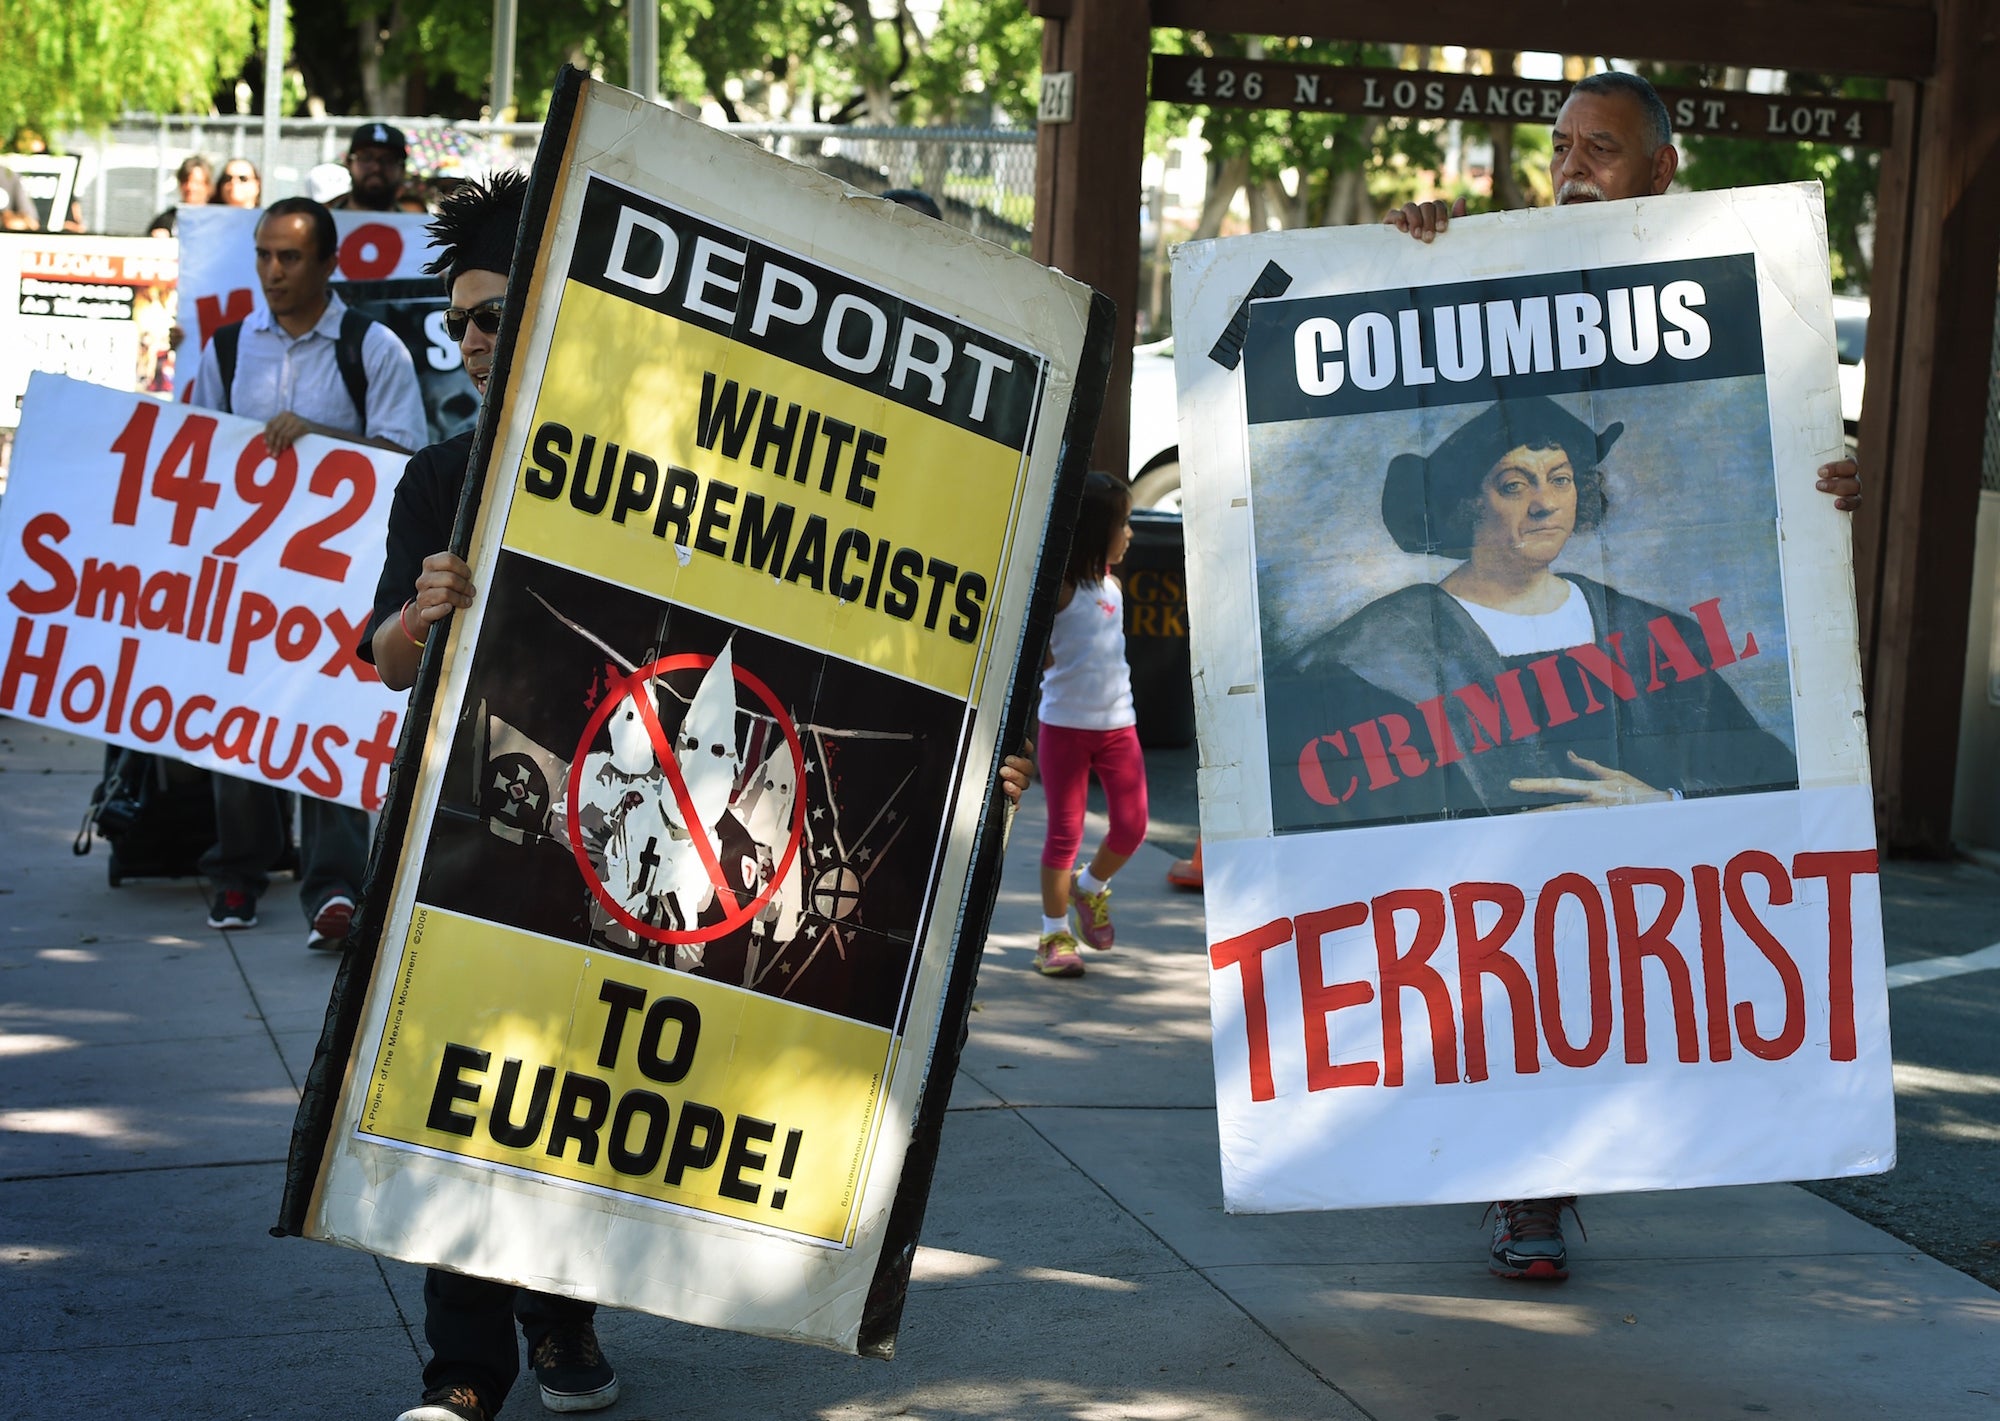 Demonstrators protest Columbus Day in Los Angeles.